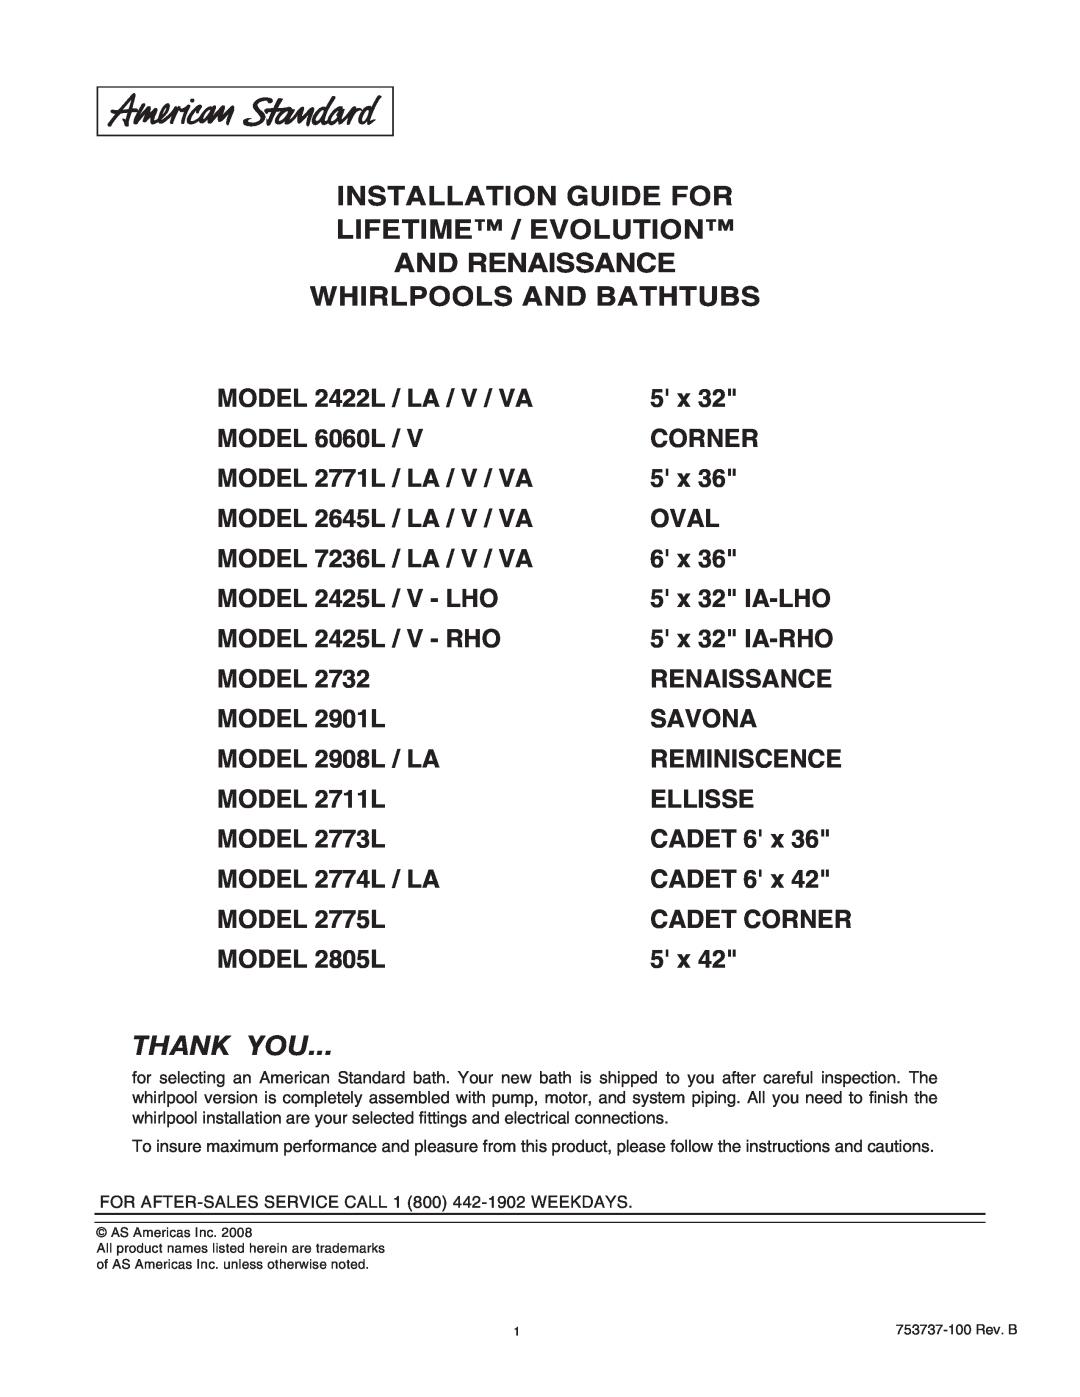 American Standard 2771VA manual Installation Guide For Lifetime / Evolution And Renaissance, Whirlpools And Bathtubs 